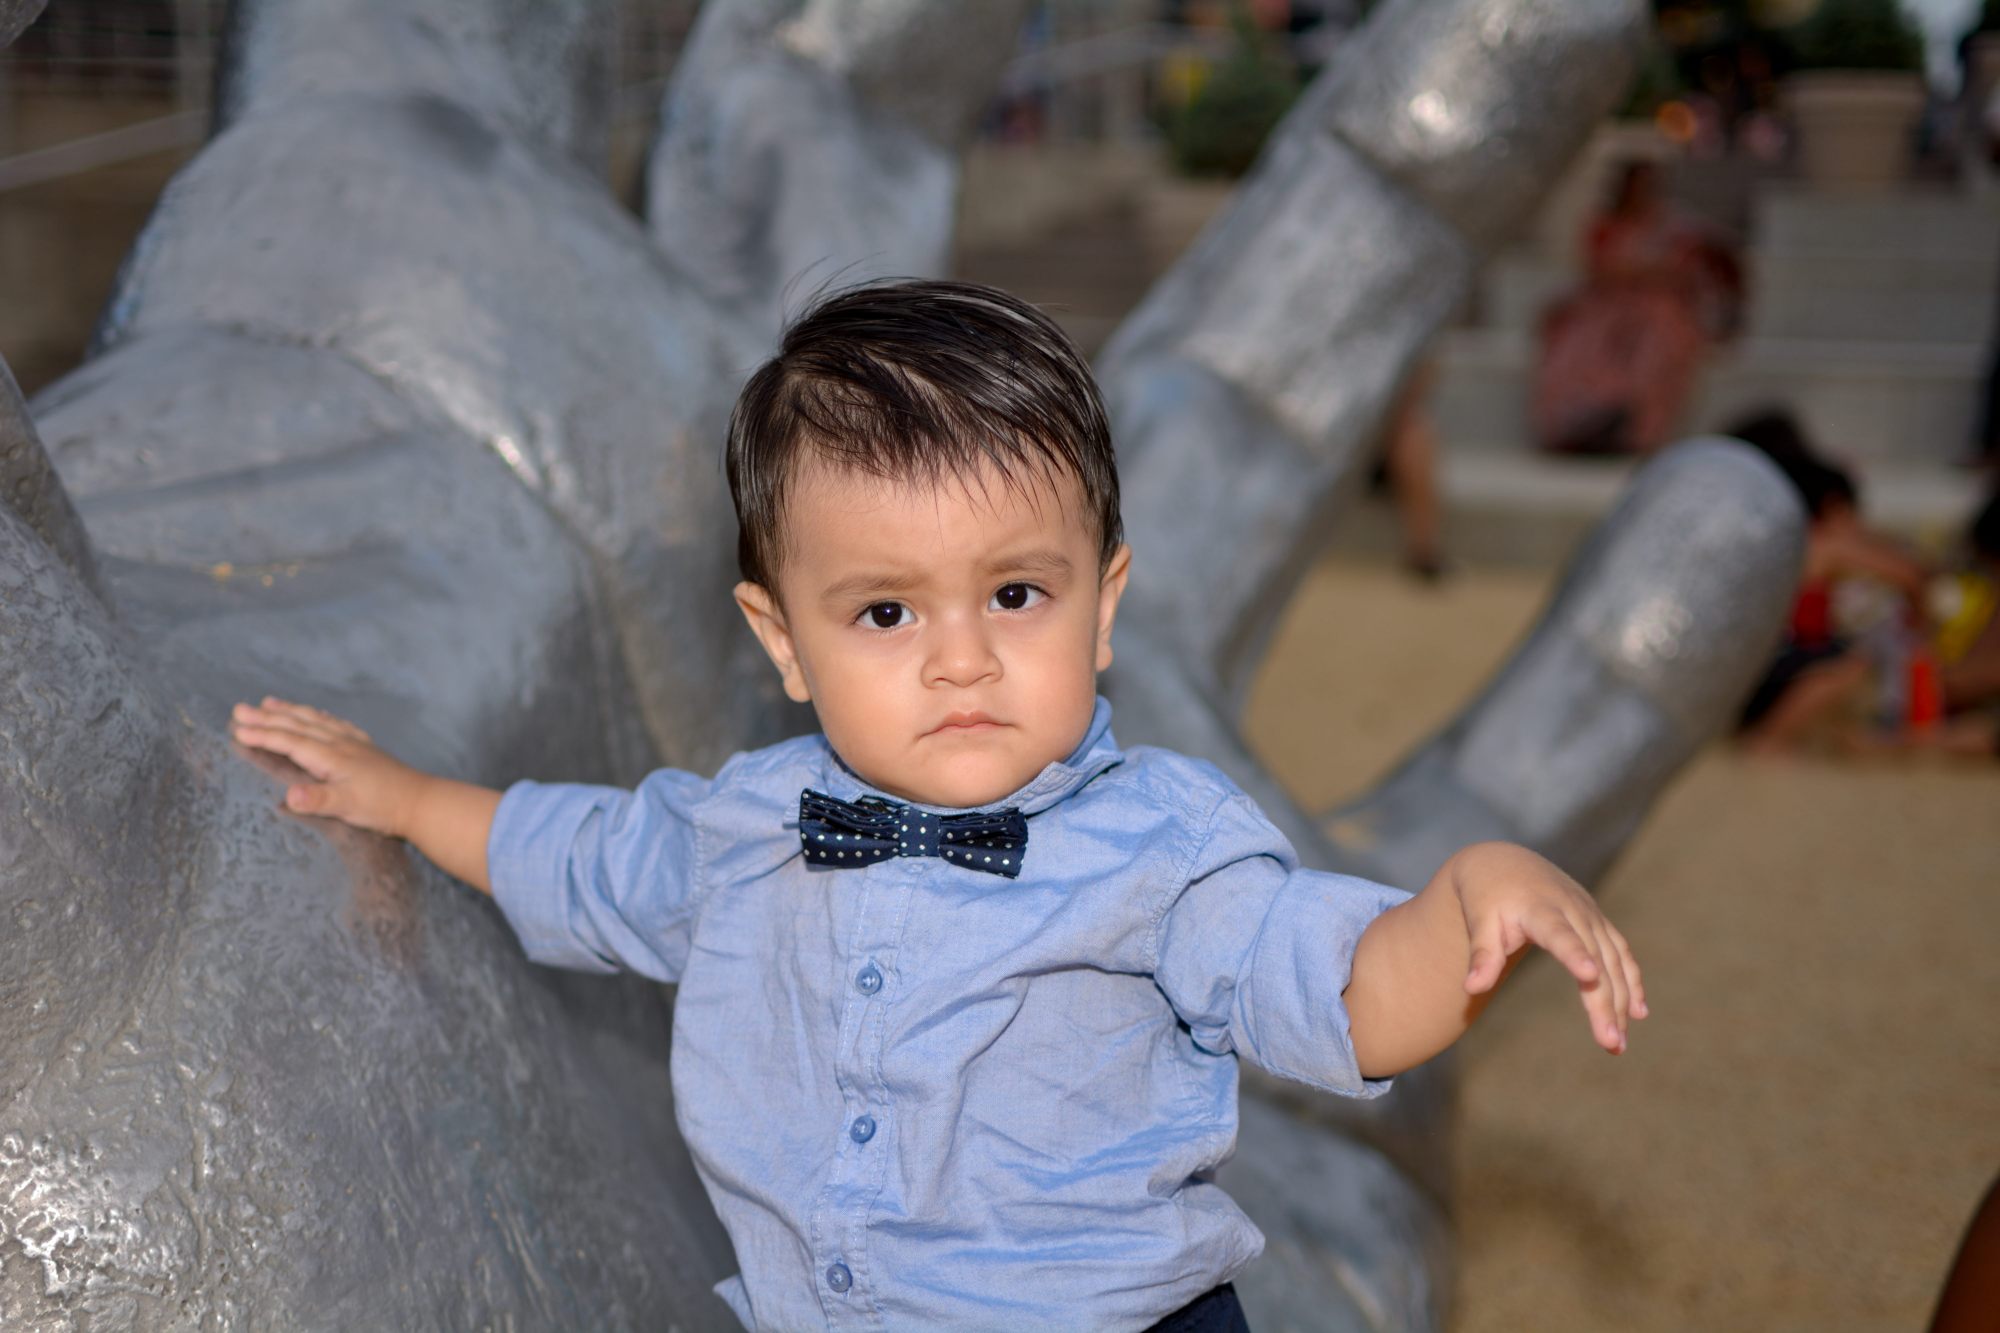 tomas hric photography's stunning family photographer portrait of handsome little boy in front of a giant hand national harbor